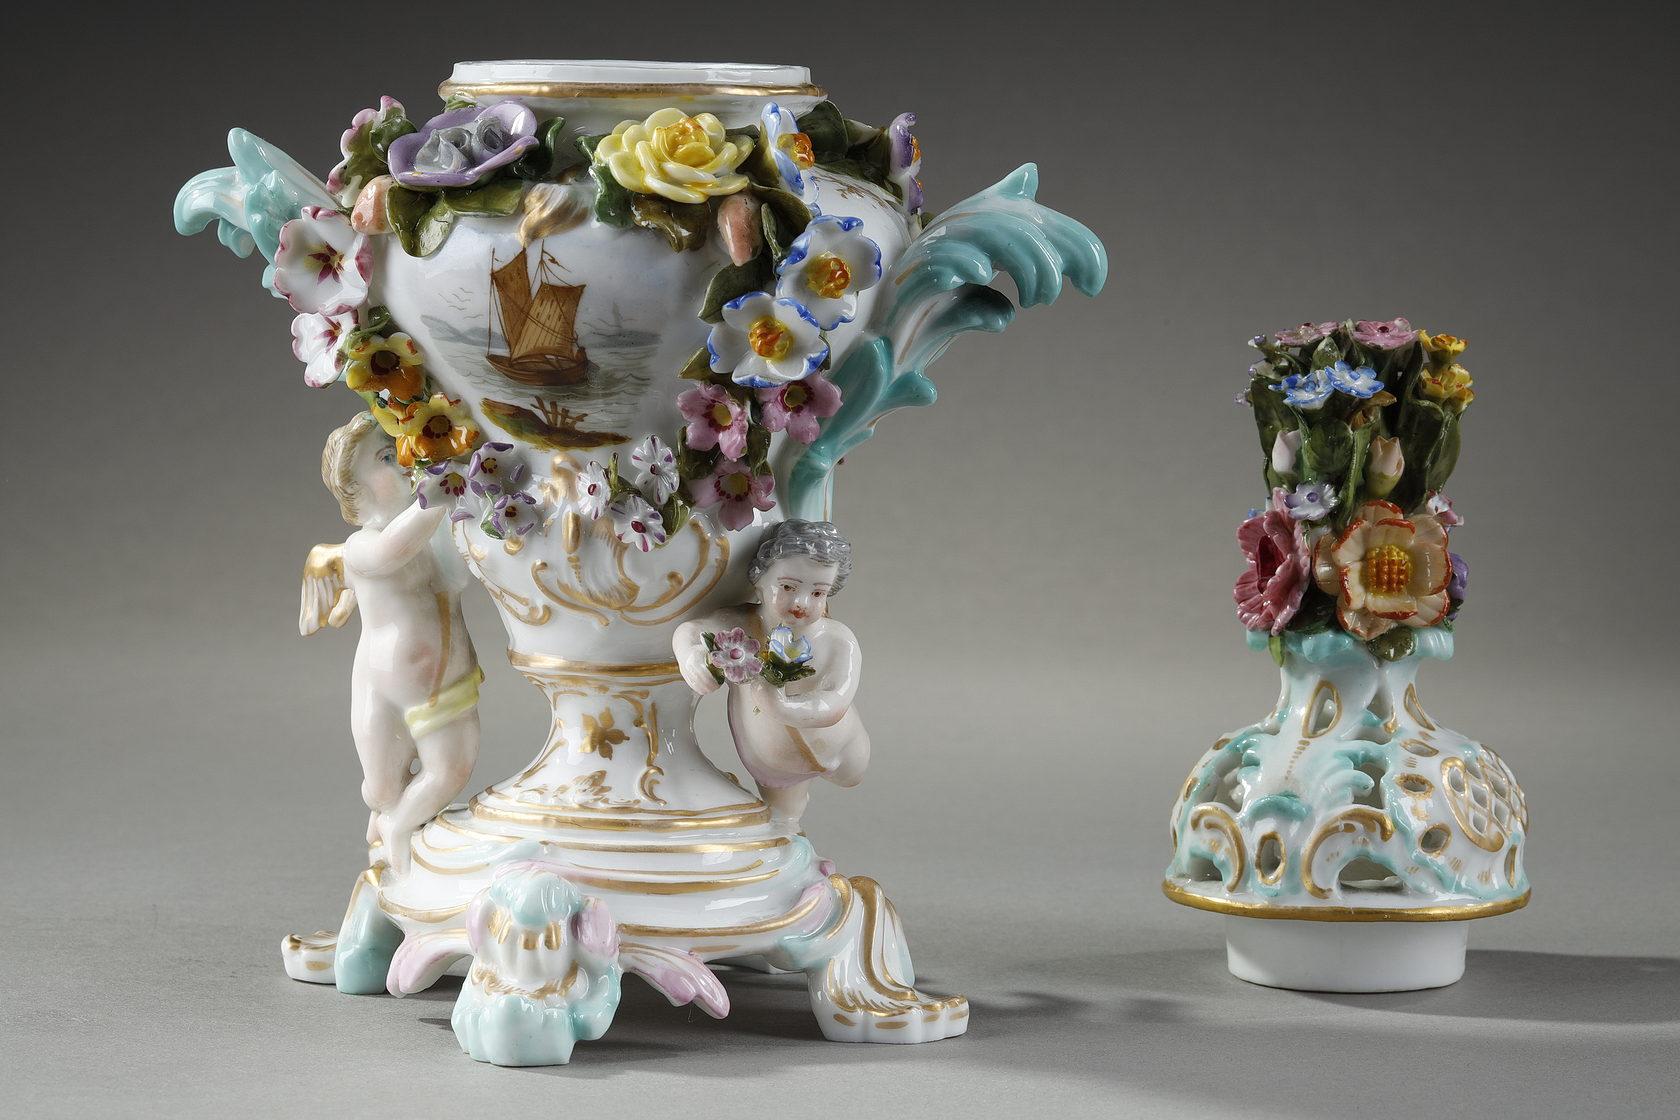 Perfume burner in polychrome porcelain from the Meissen manufacture 9